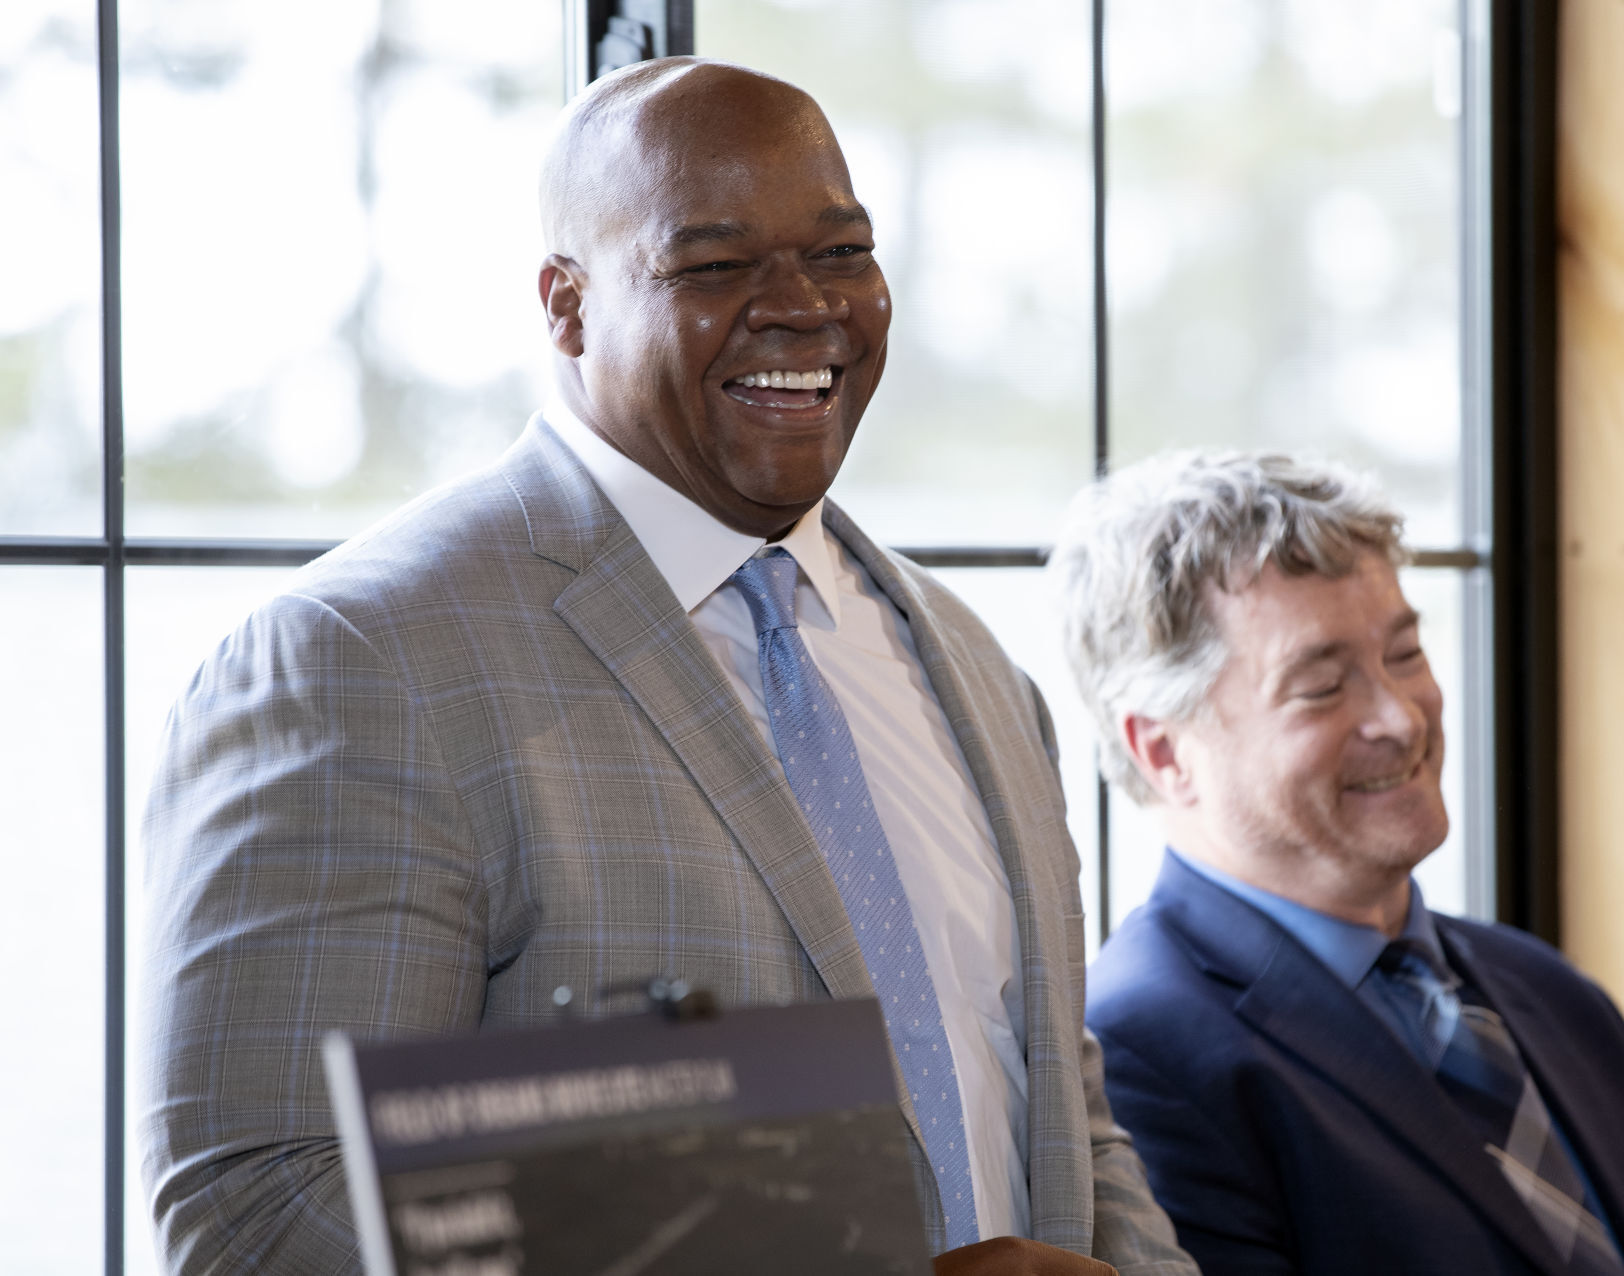 Major League Baseball Hall of Famer Frank Thomas, CEO of Go the Distance Baseball, laughs during a press conference at the Field of Dreams on Thursday, April 14, 2022, to discuss a planned, $80 million expansion for the iconic movie site.    PHOTO CREDIT: Stephen Gassman